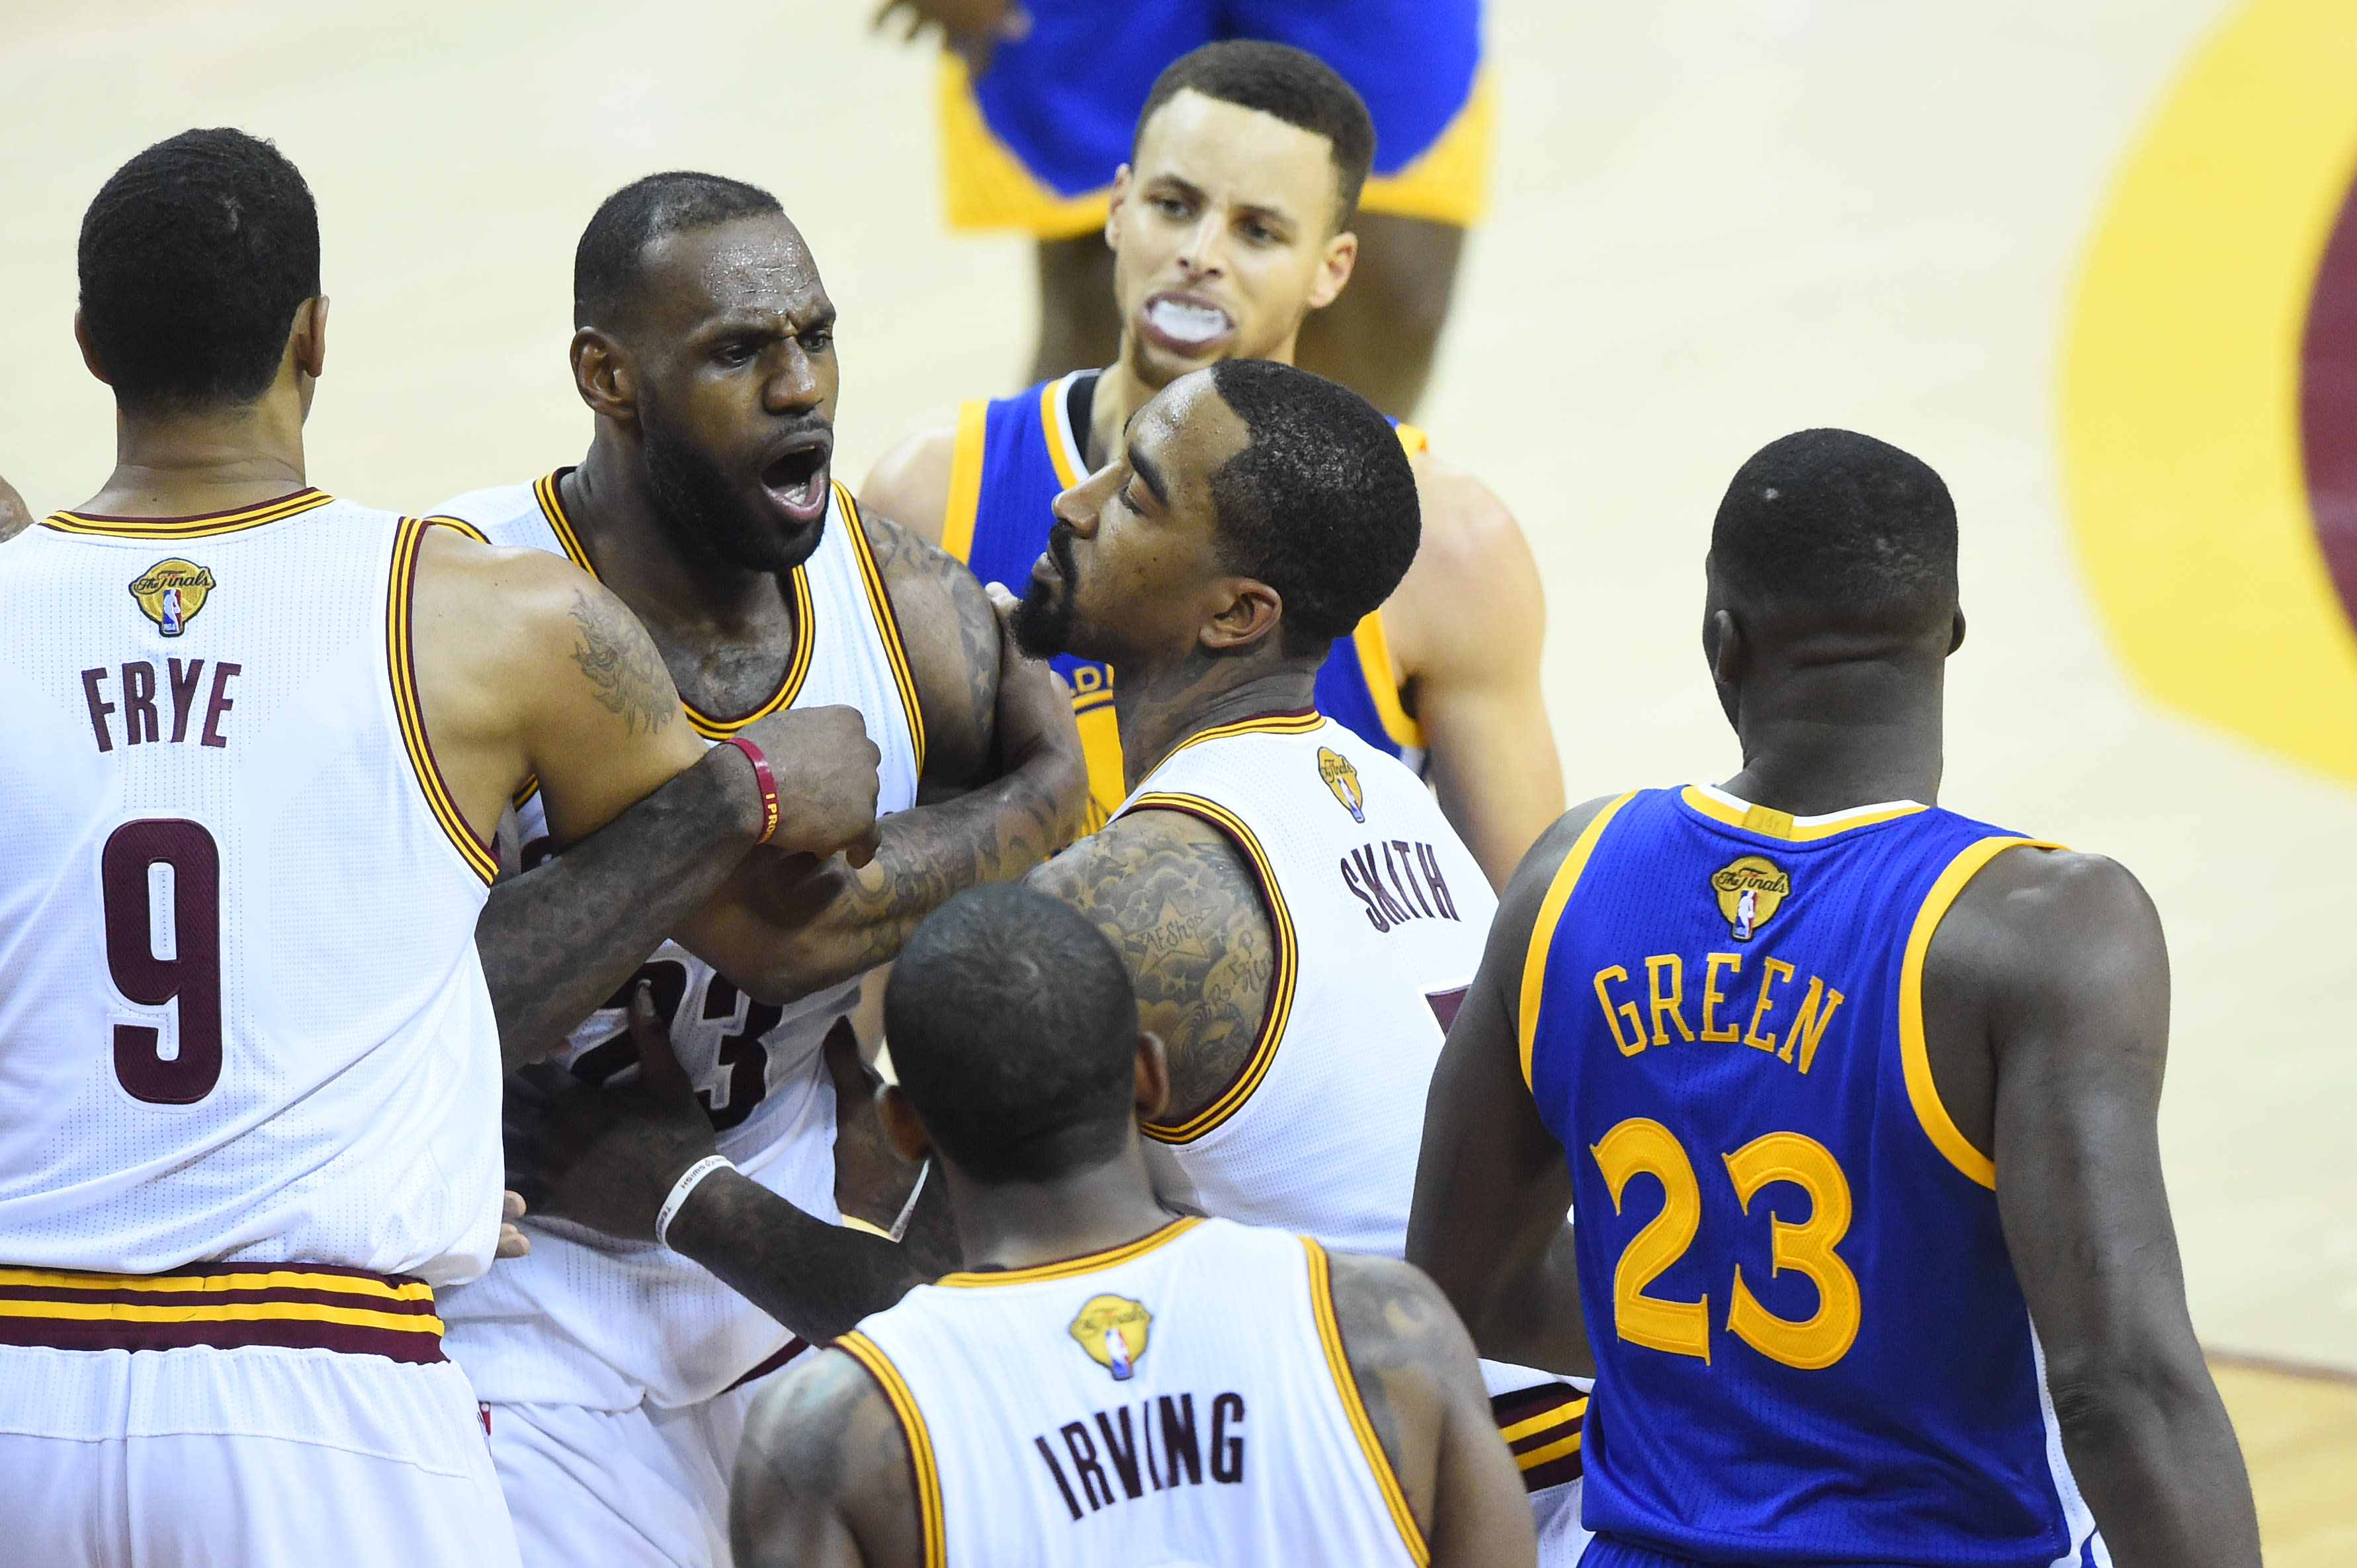 No sweep as Cavs outlast Warriors in Game 4